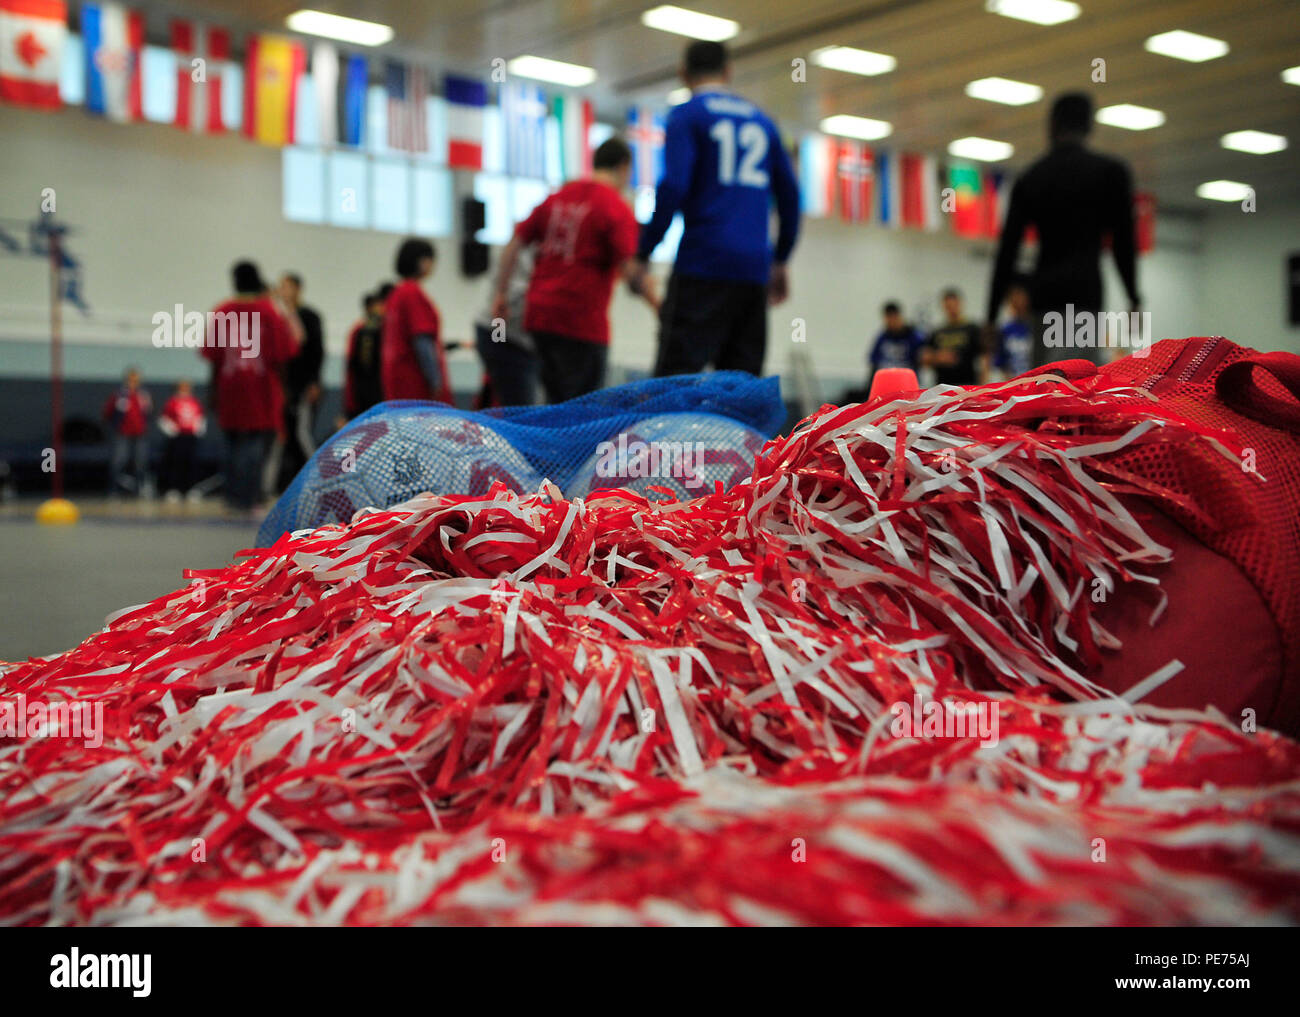 Soccer equipment and pompoms lie on the floor during the Kaiserslautern Military Community Adaptive Sports soccer event Oct. 15, 2015, at Vogelweh Military Complex, Germany. Students from Ramstein and Vogelweh Middle and High Schools came together for a friendly soccer competition to build camaraderie and morale. (U.S. Air Force photo/Airman 1st Class Larissa Greatwood) Stock Photo